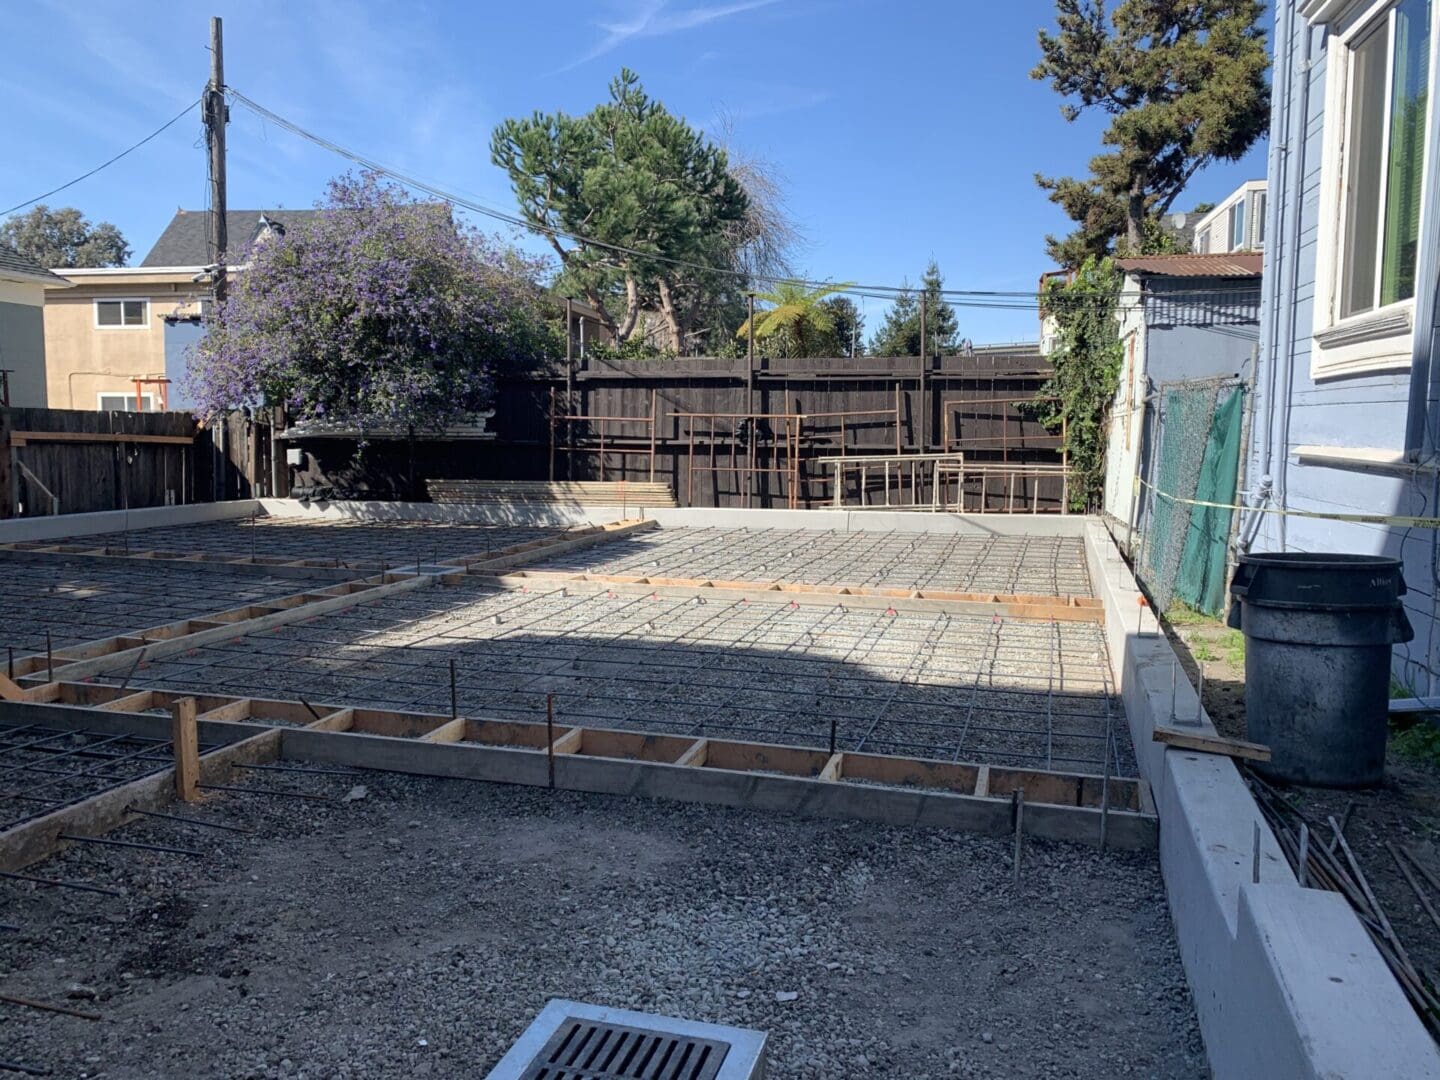 A backyard with concrete slab and a fence.